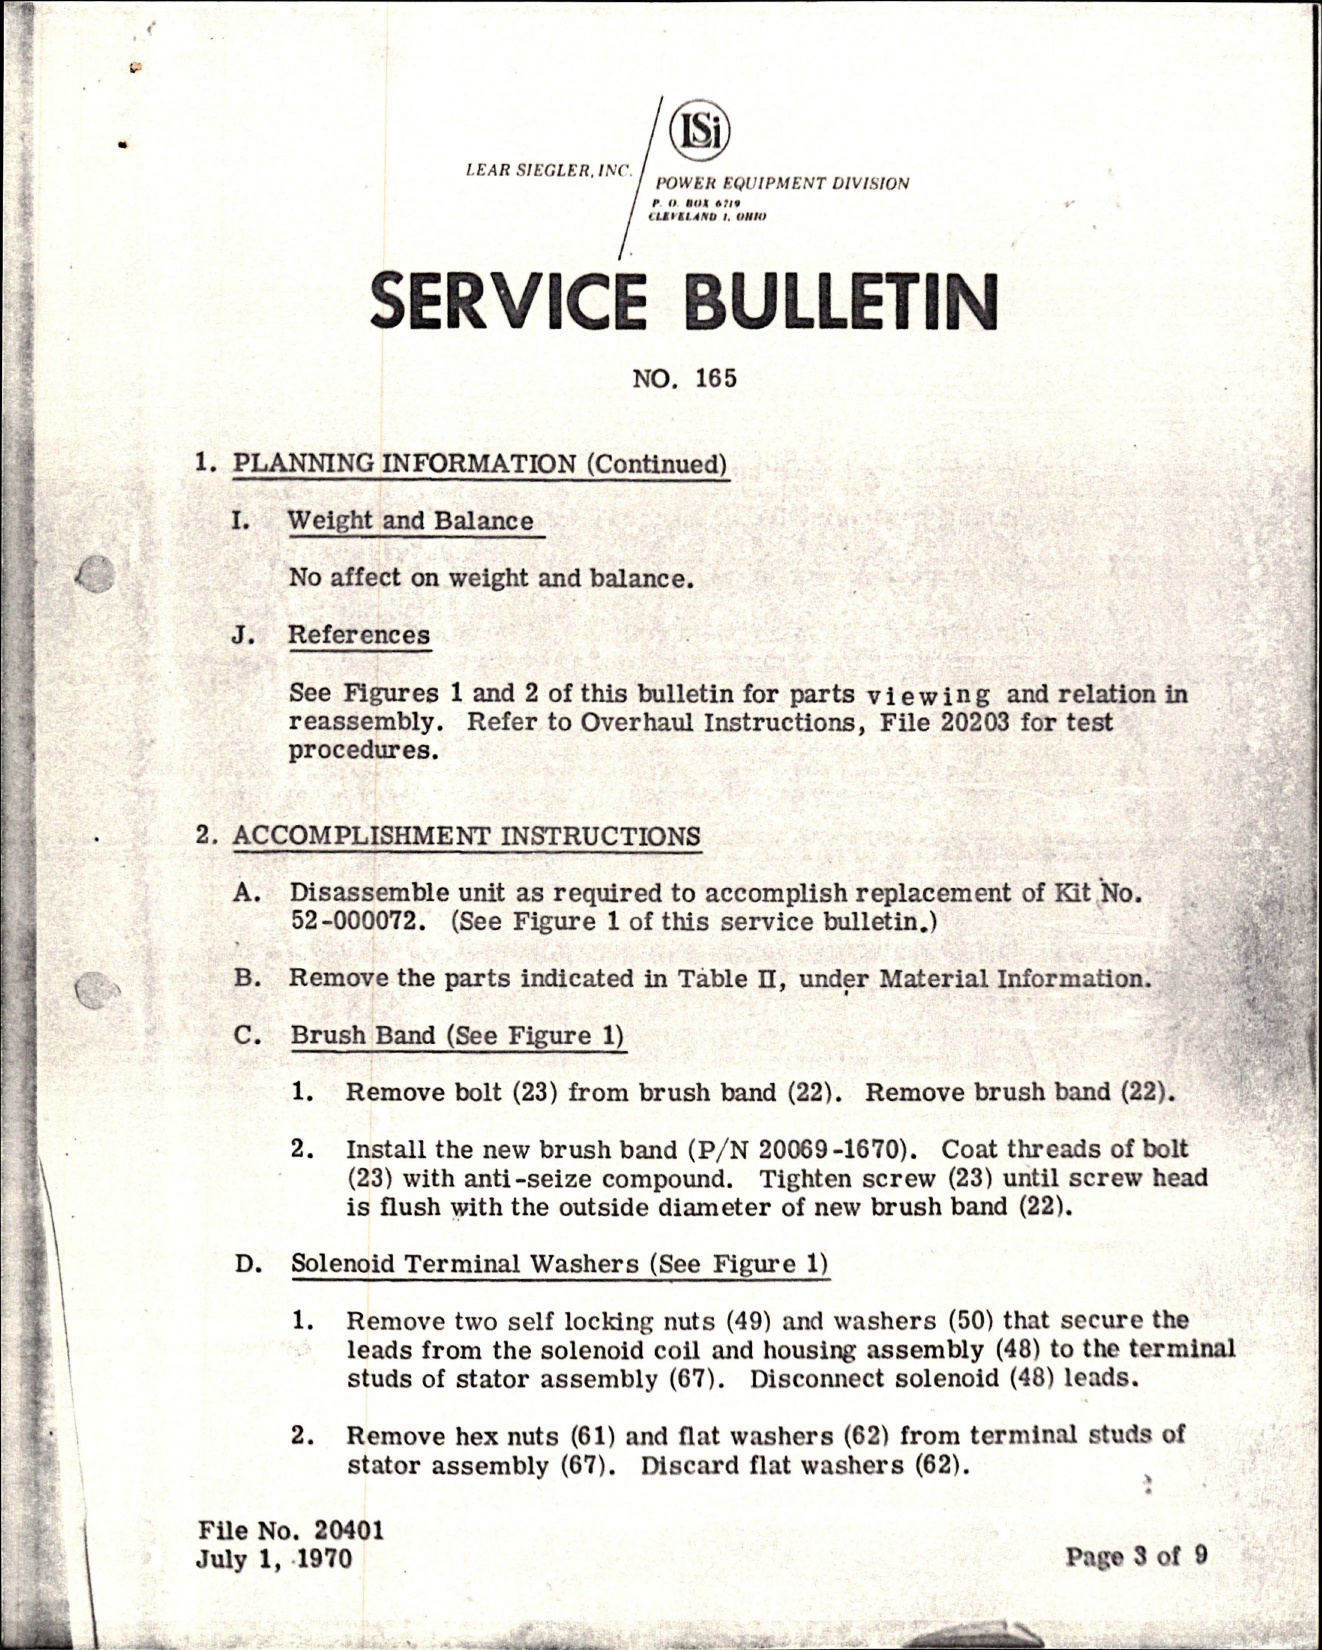 Sample page 7 from AirCorps Library document: Service Bulletin No. 165 for Modification of Electrical Power 